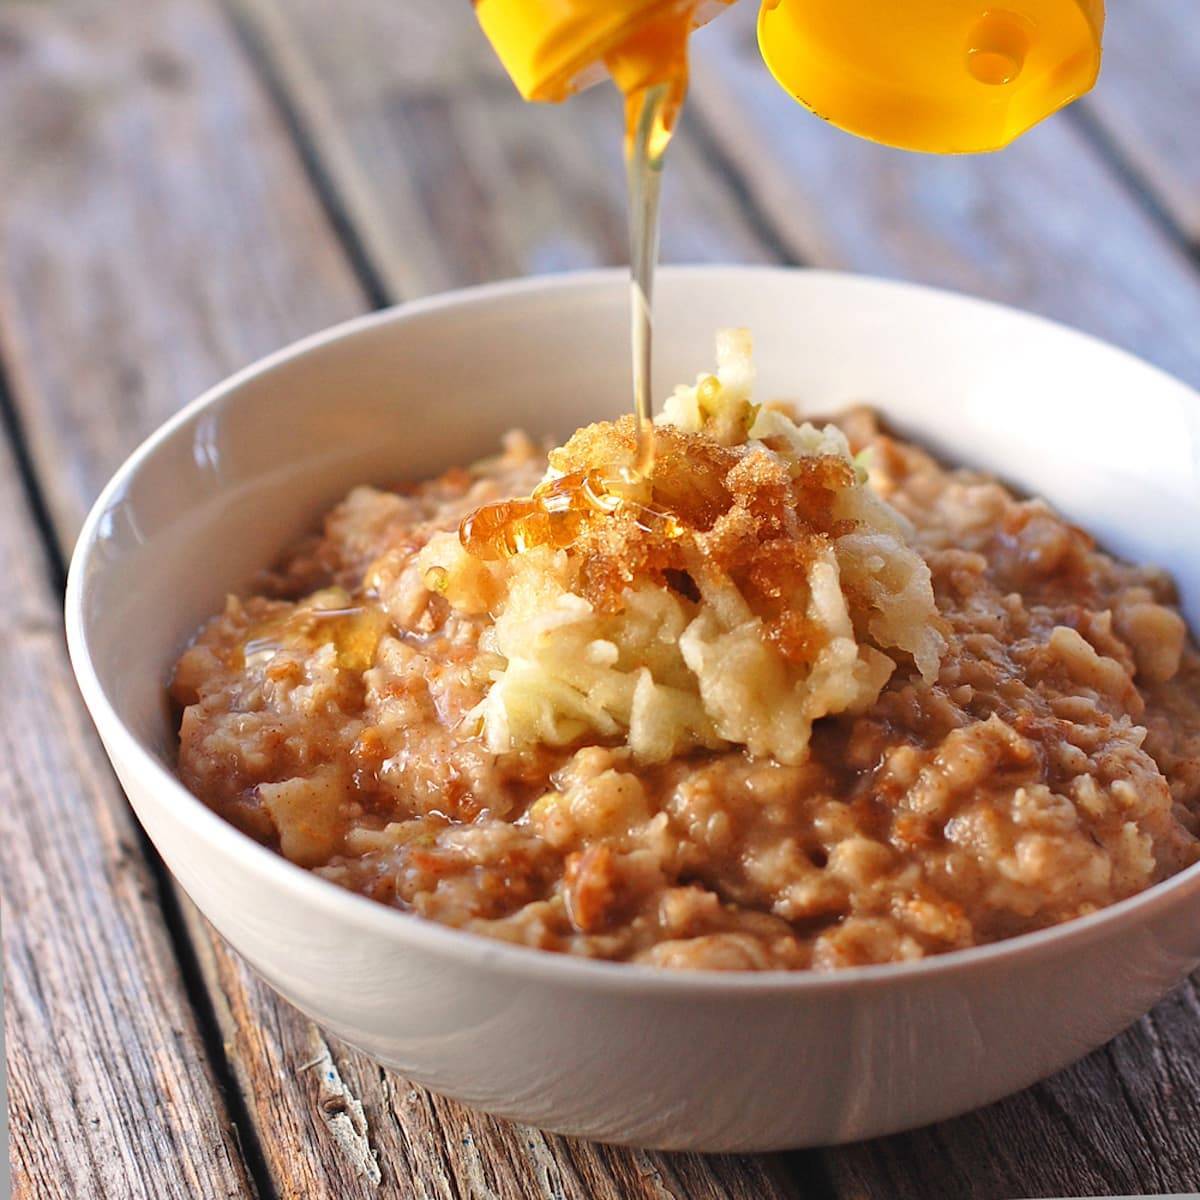 Brown sugar apple bran oatmeal with honey drizzle.